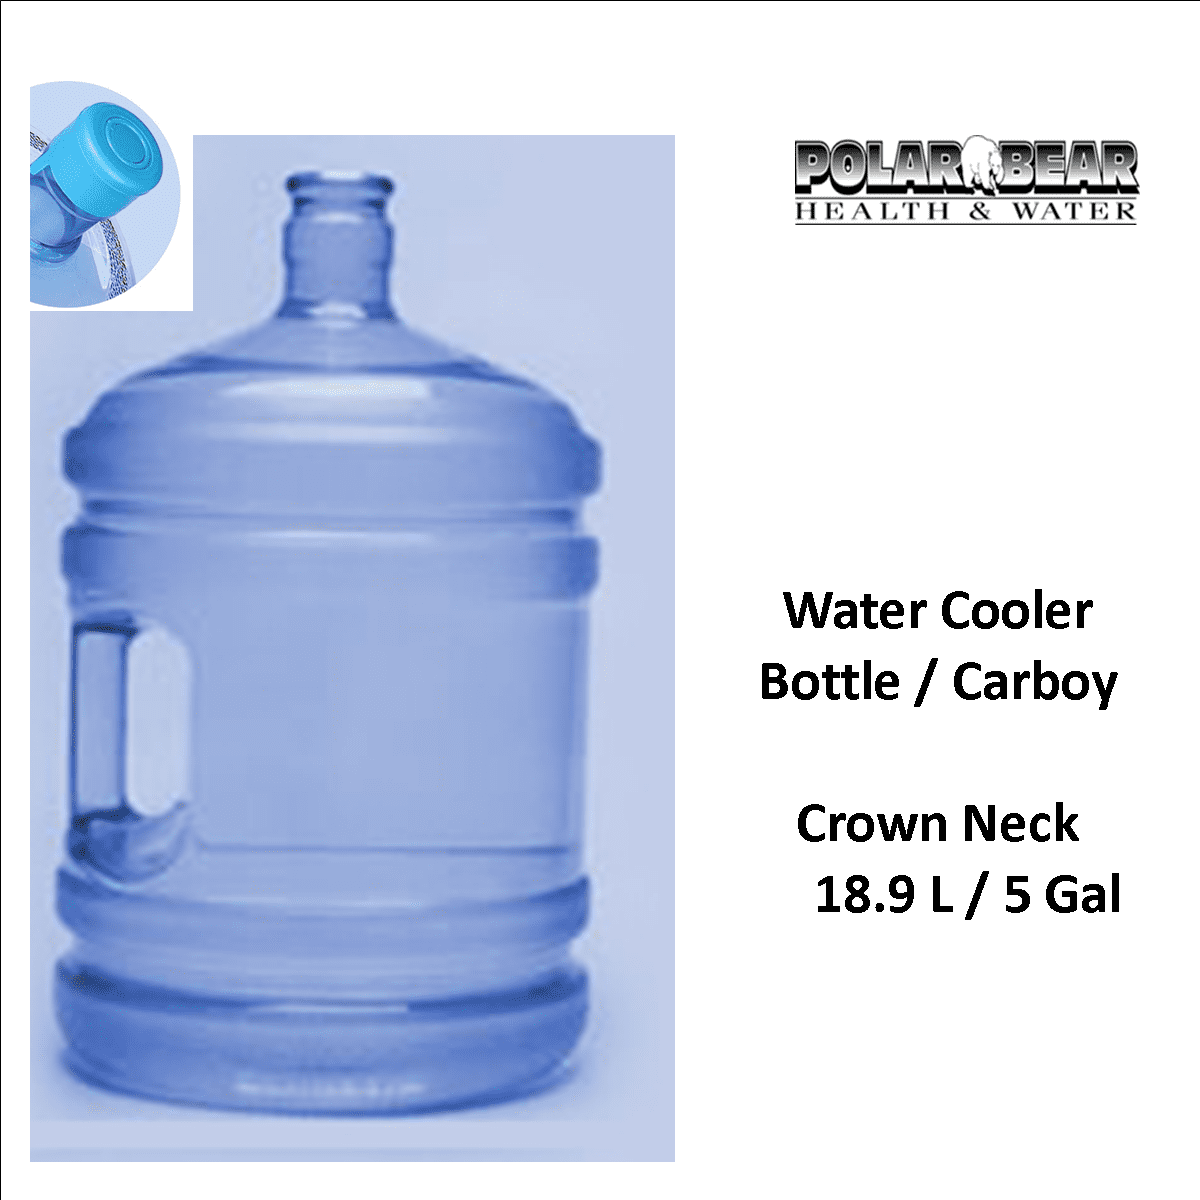 https://polarbearhealth.com/wp-content/uploads/2015/11/5-gallon-crown.png